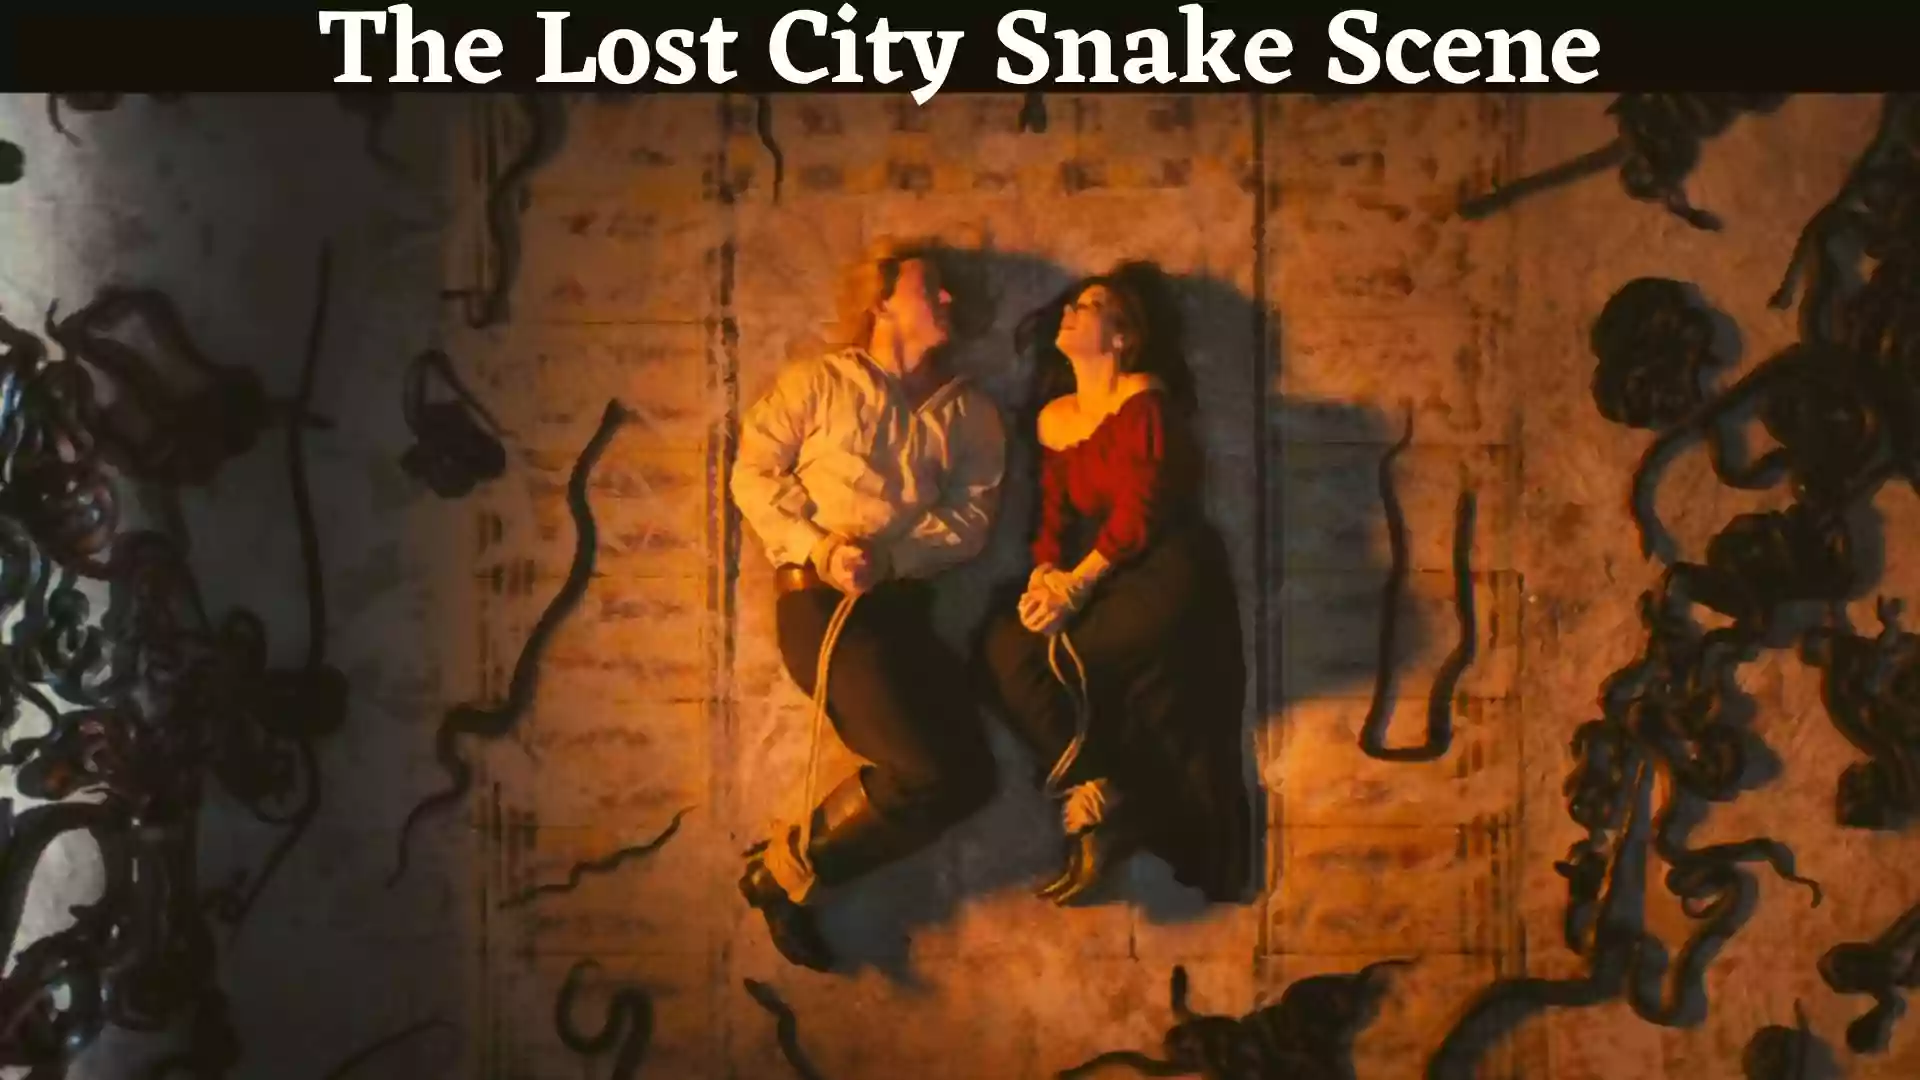 The Lost City Snake Scene | The Lost City Snakes 2022